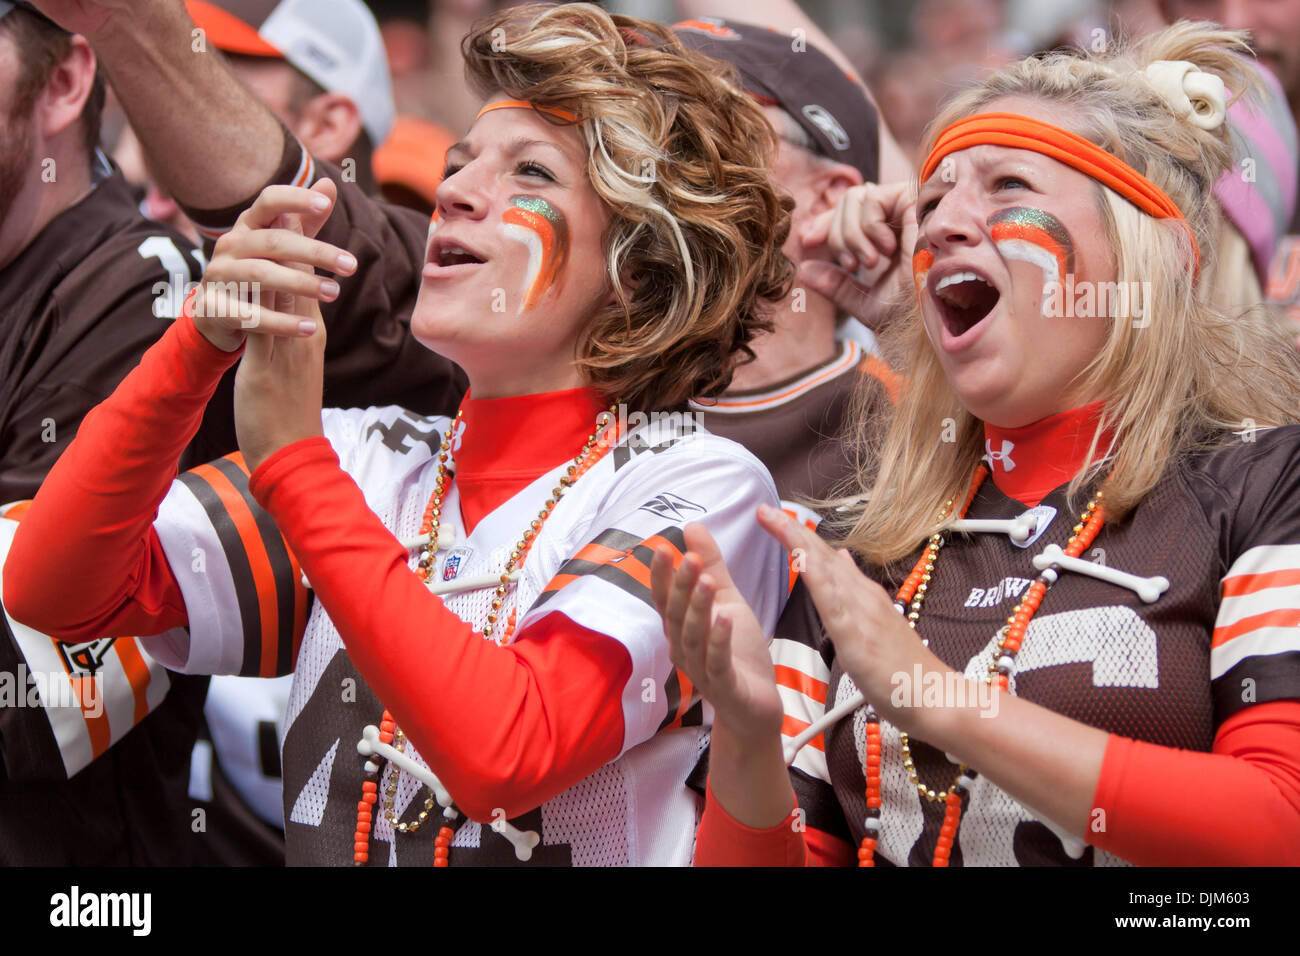 Sept. 19, 2010 - Cleveland, Ohio, United States of America - Cleveland Browns fans cheer on the Browns defense during the game against the Kansas City Chiefs.  The Kansas City Chiefs defeated the Cleveland Browns 16-14 in the game played at Cleveland Browns Stadium in Cleveland Ohio. (Credit Image: © Frank Jansky/Southcreek Global/ZUMApress.com) Stock Photo